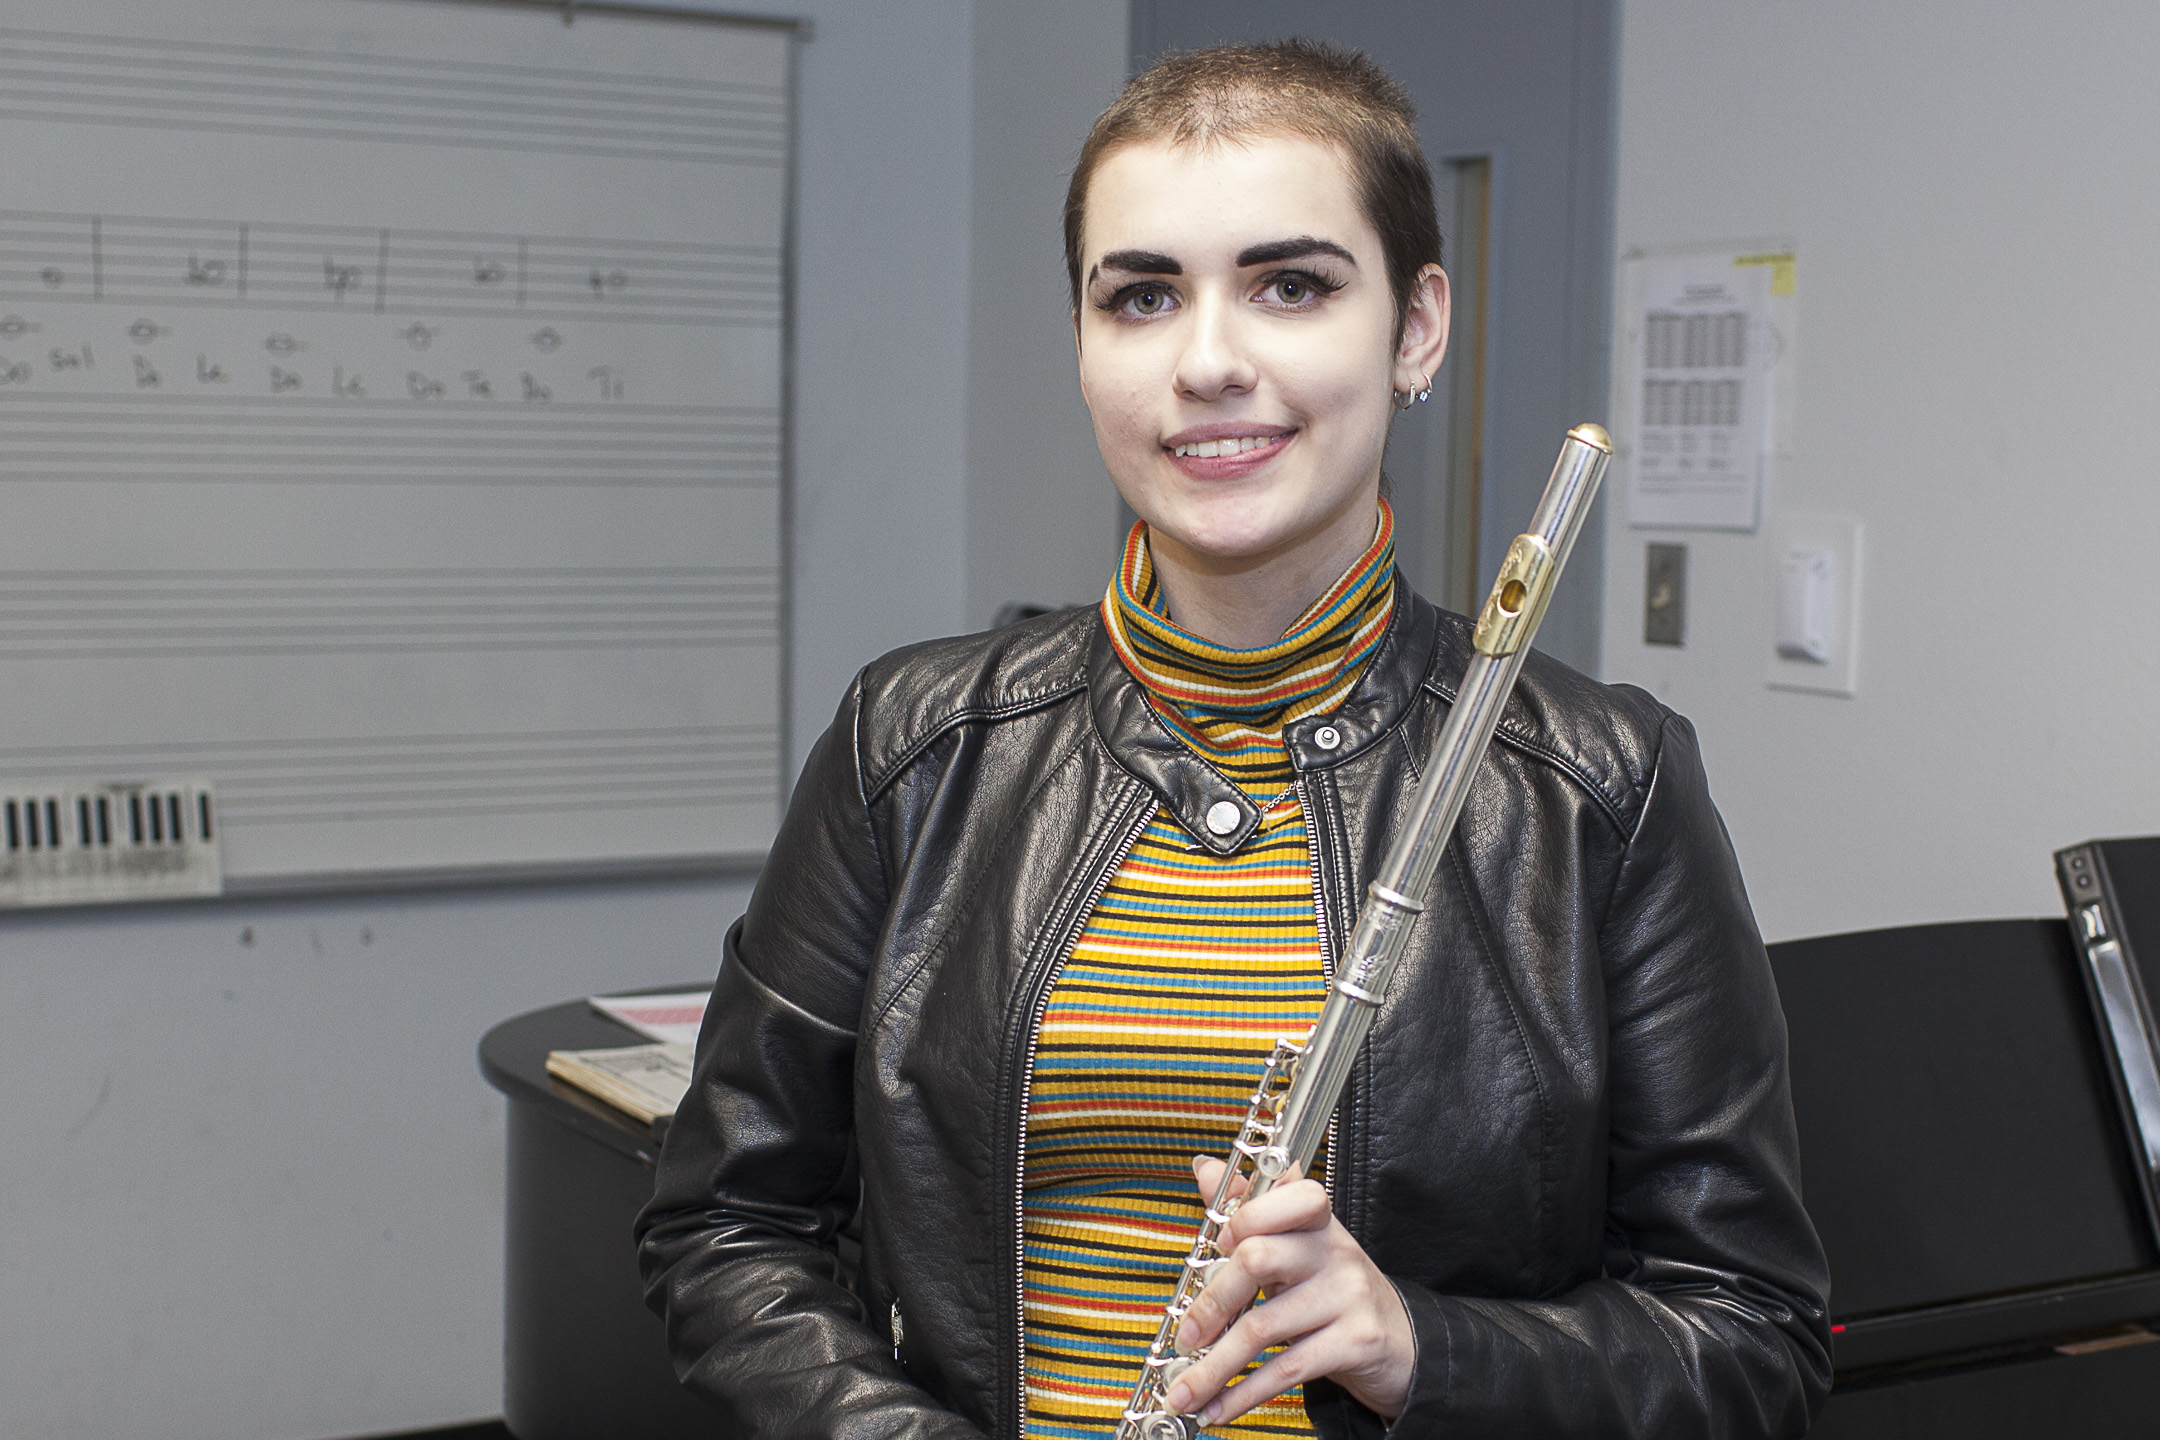 ALL-STATE ACHIEVEMENT - WCJC's Harding selected for All-State Band